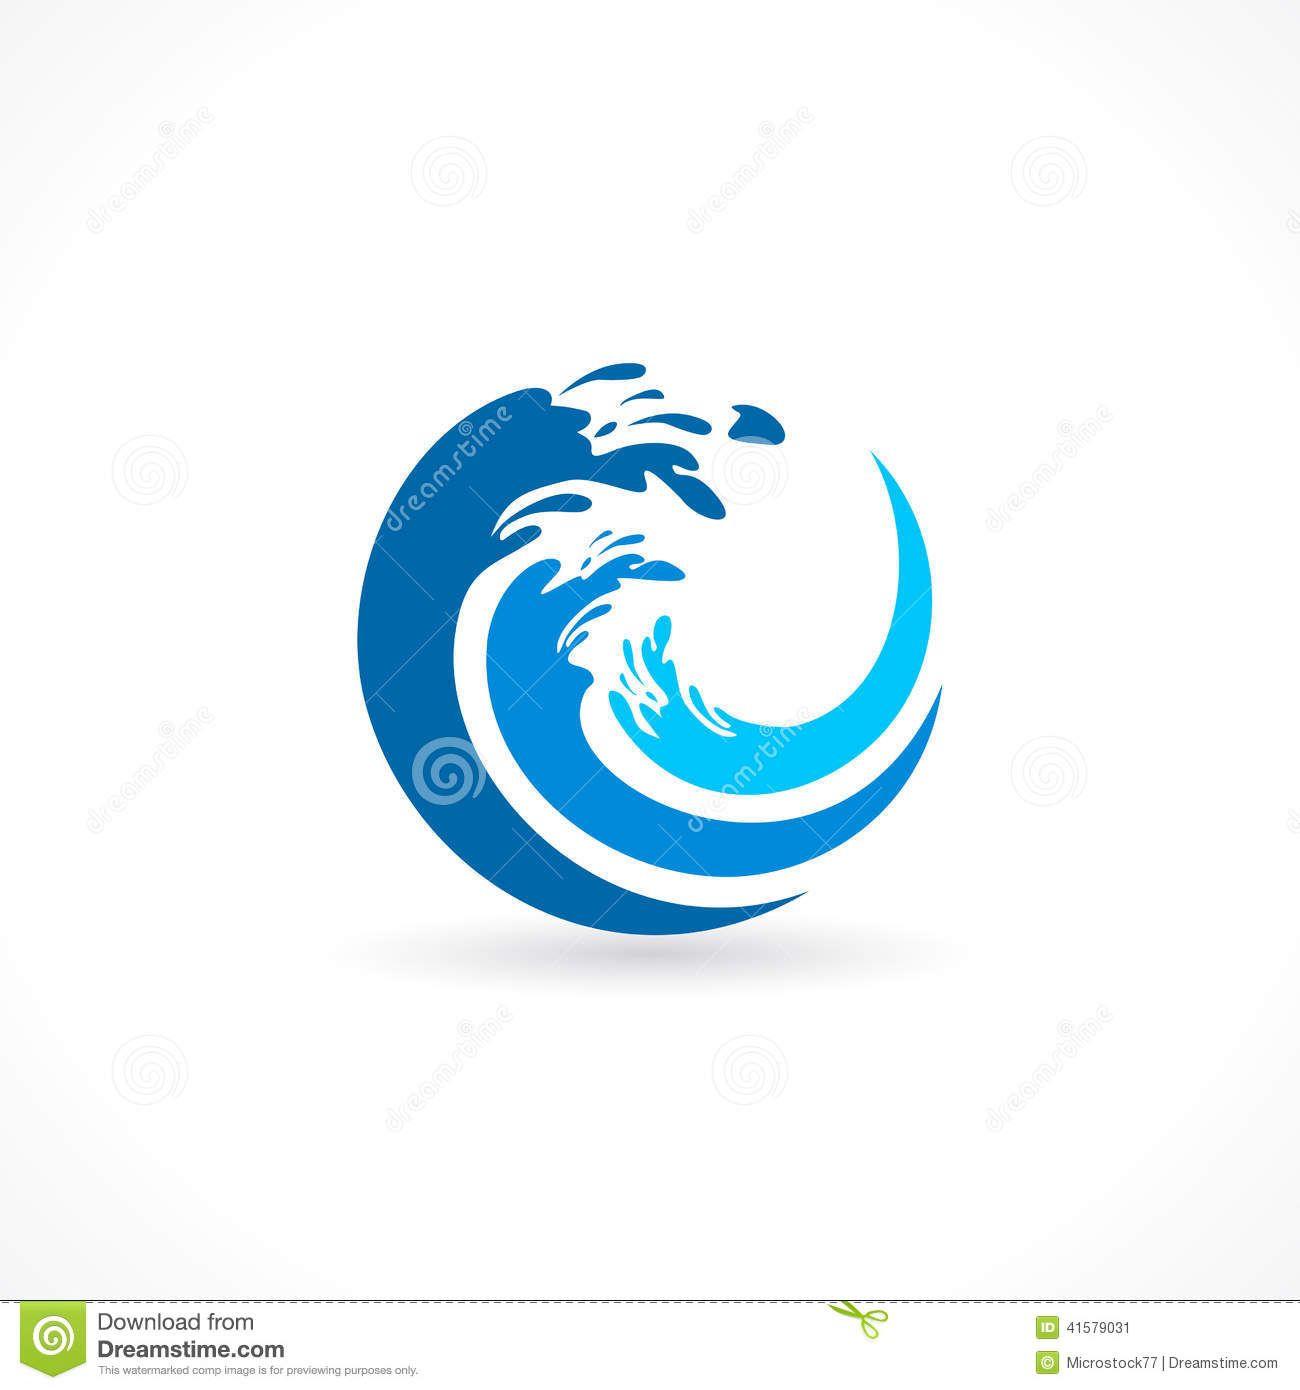 Water Circle Logo - Water Wave Splash Icon - Download From Over 64 Million High Quality ...